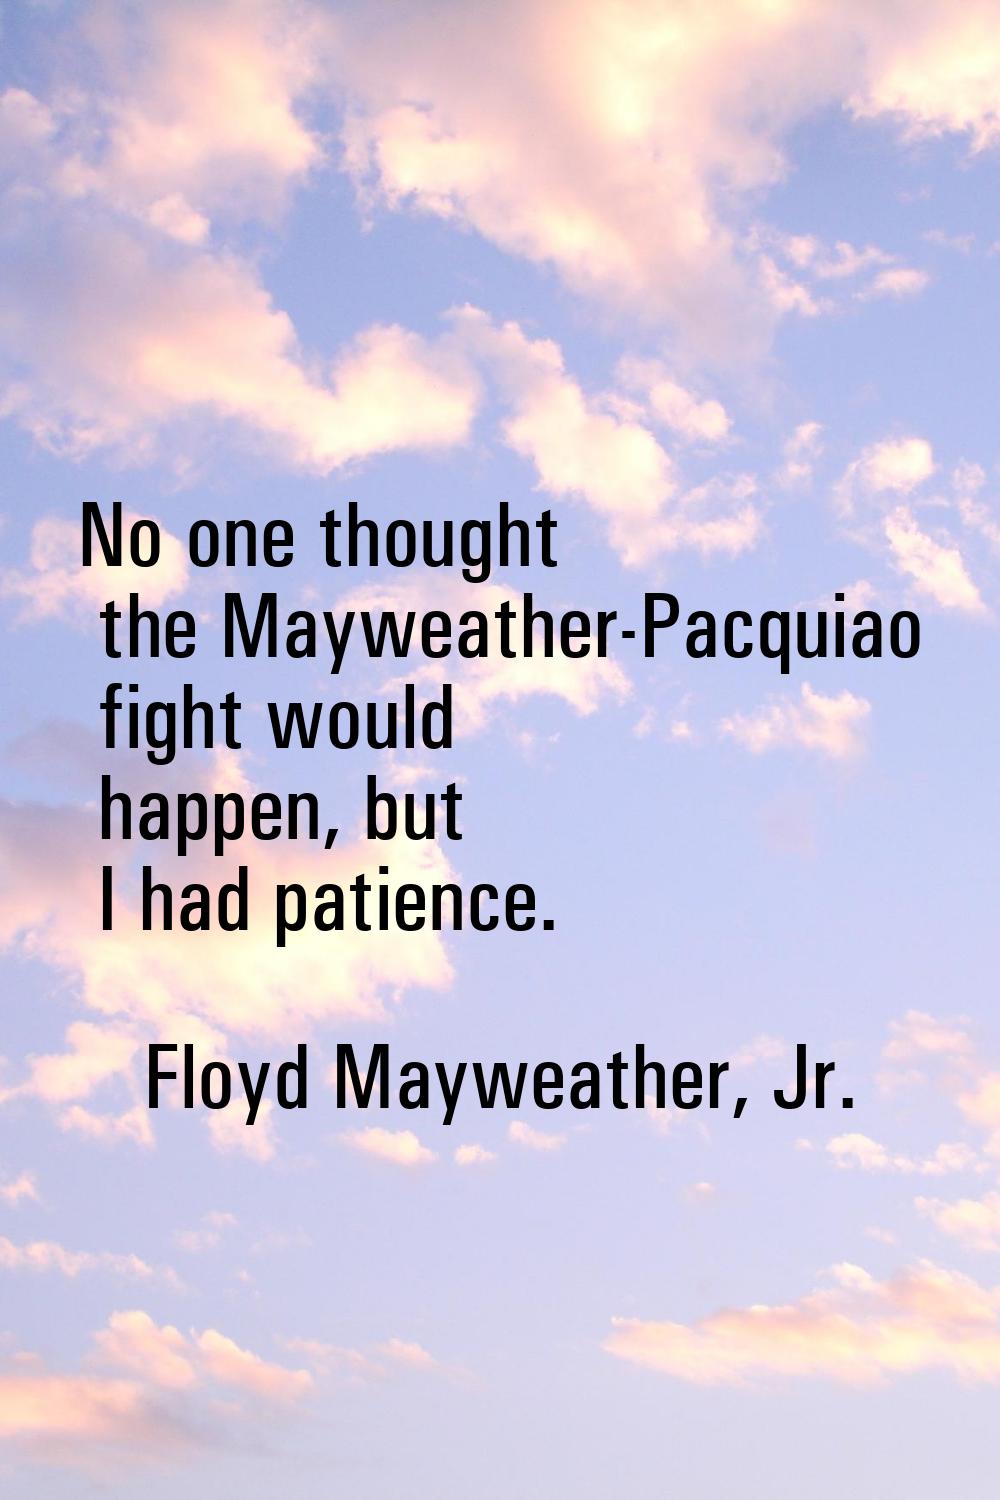 No one thought the Mayweather-Pacquiao fight would happen, but I had patience.